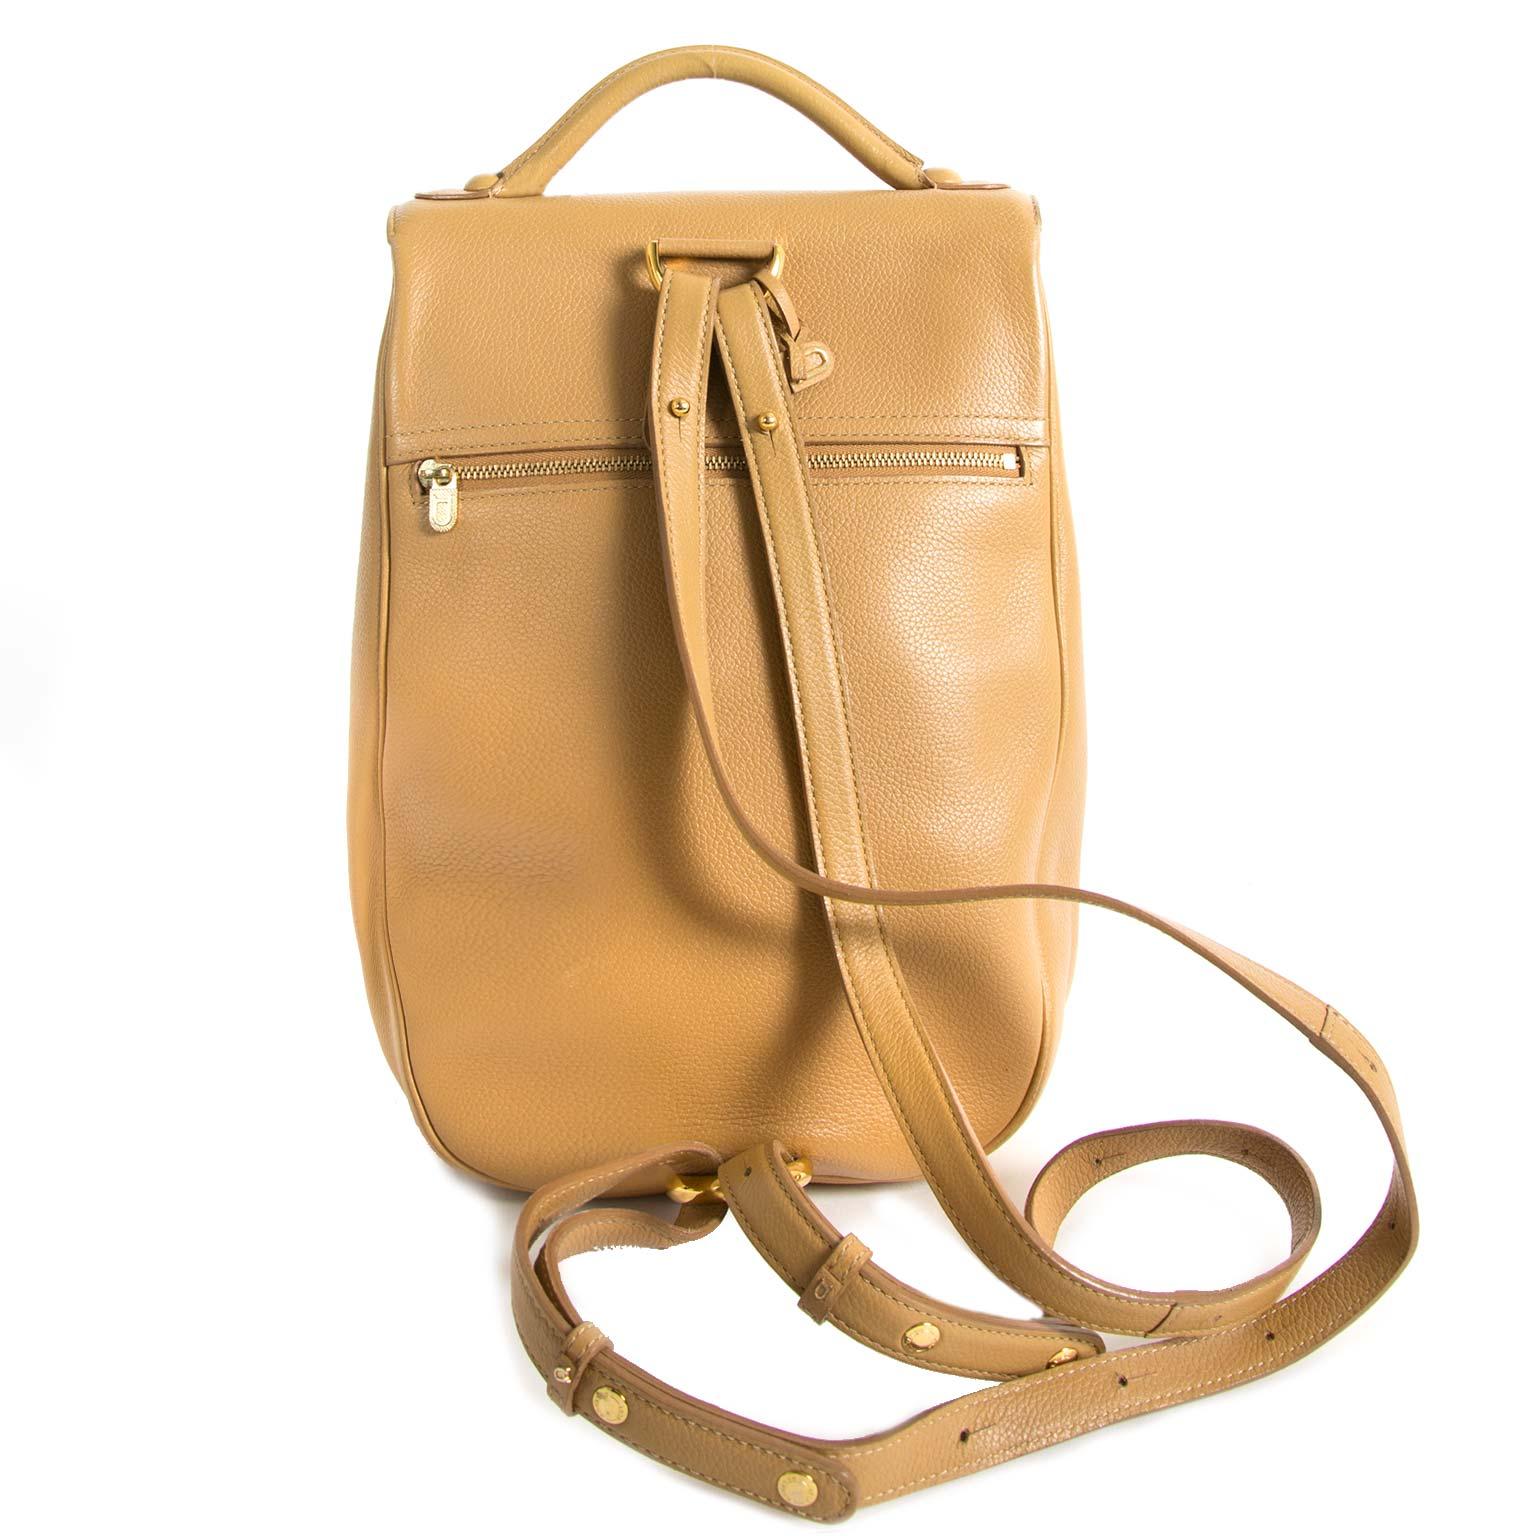 very good condition

Delvaux Beige Brillant Backpack

The Delvaux Brillant is one of the most iconic bags ever made. This backpack features all the trademark elements of the Brillant handbag, but is more easy going.
The backpack features beige